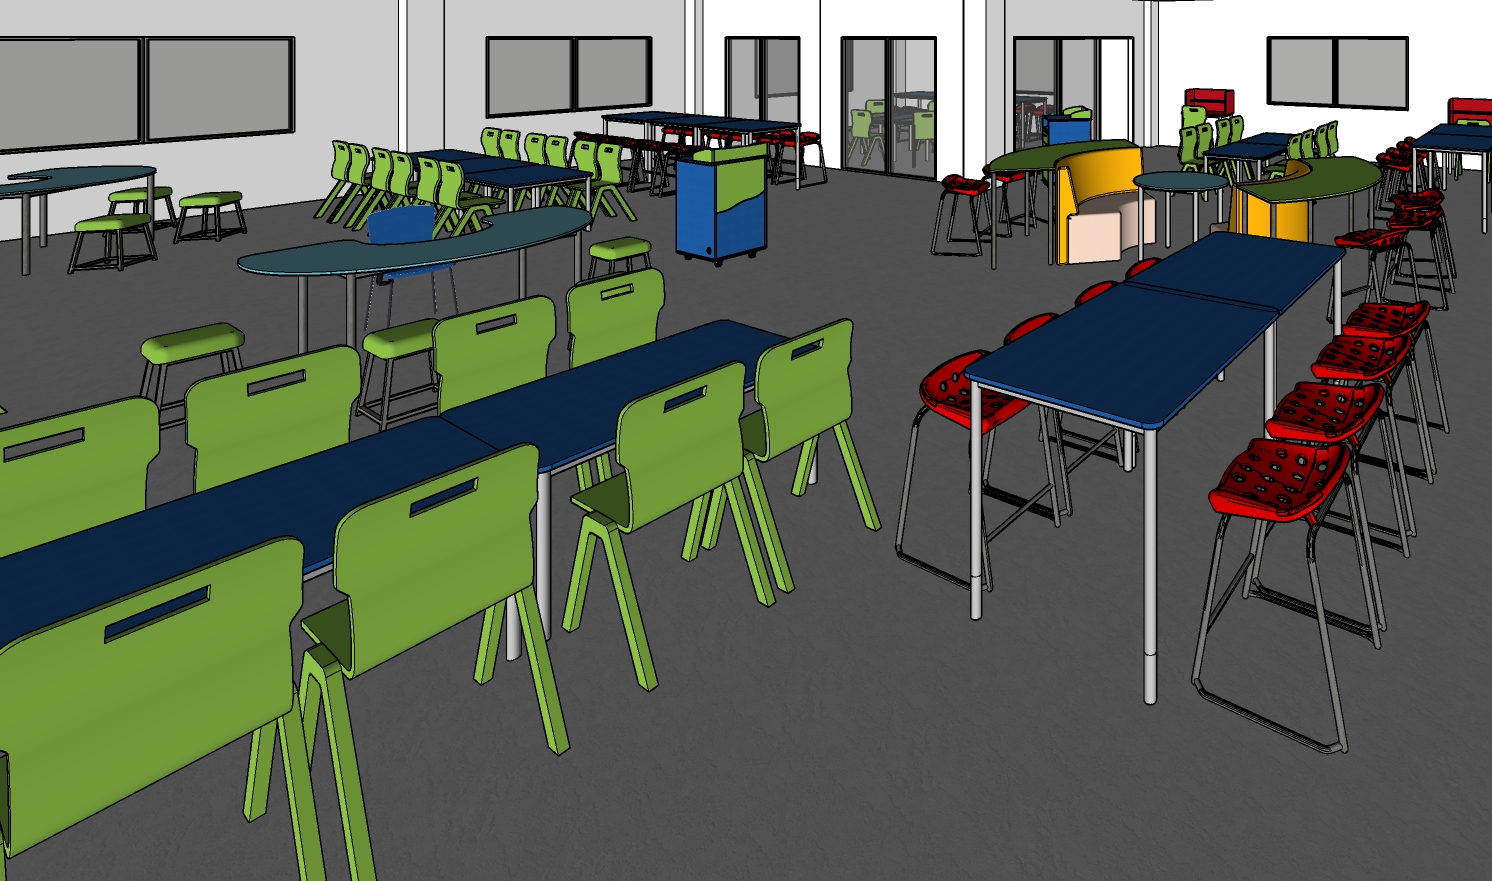 Educated furniture 3D design of classroom fitout